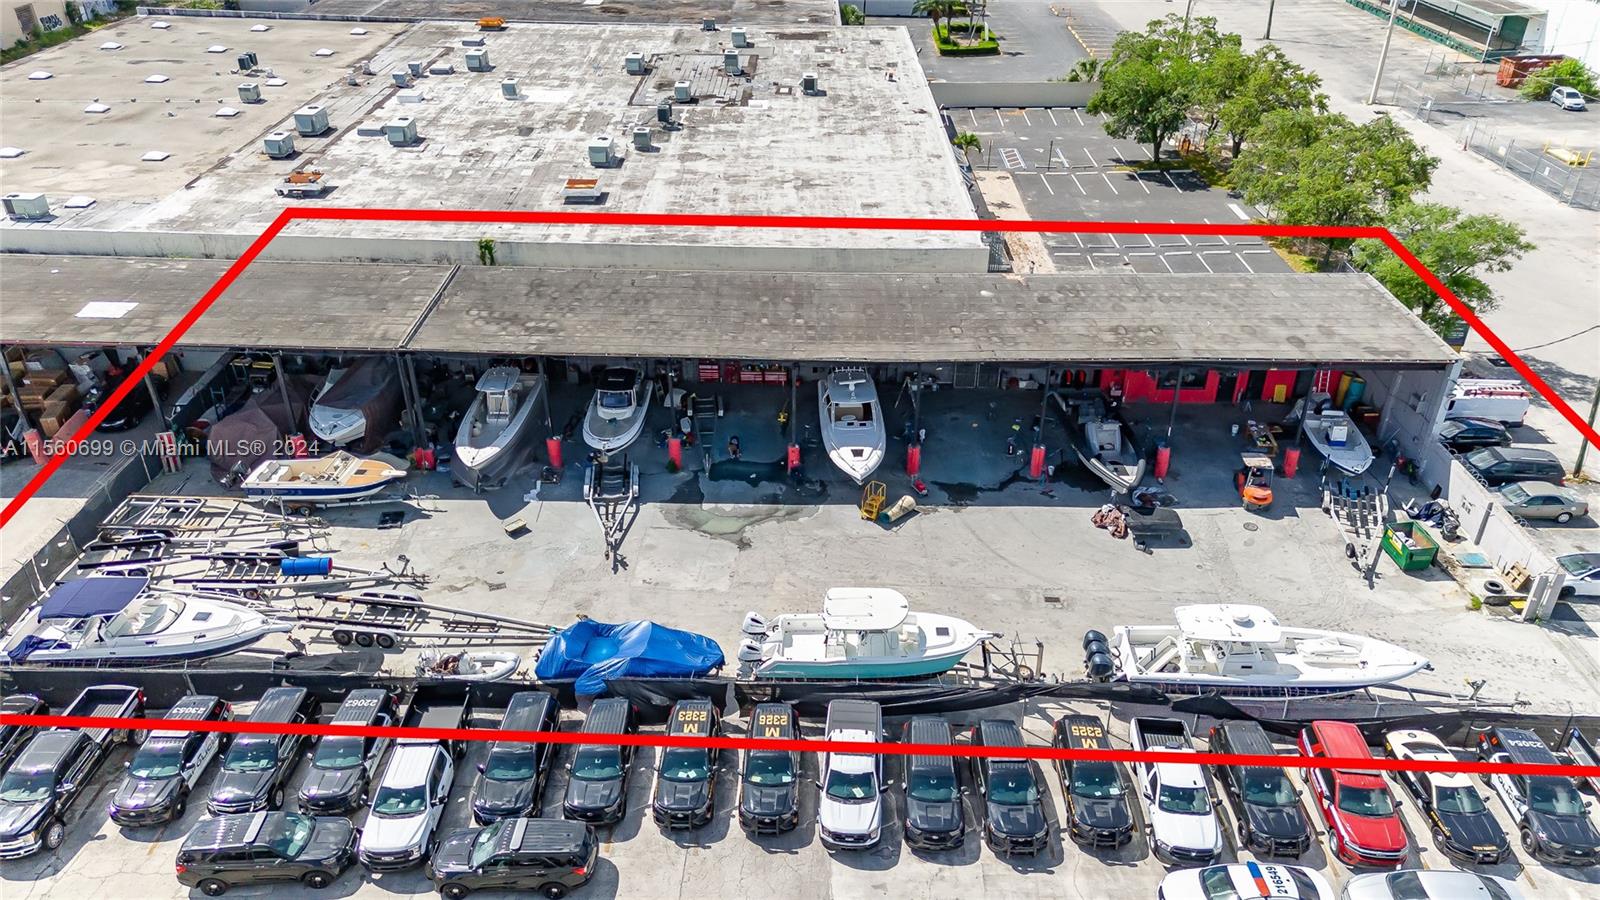 Fully fenced 20,000 sq ft of industrial land, partially covered. Less then 15 Mins to Miami International Airport, very centrally located. Plenty of parking and storage for large vehicles, heavy equipment or boats. Office Space and bathrooms in great condition. Easy to show.